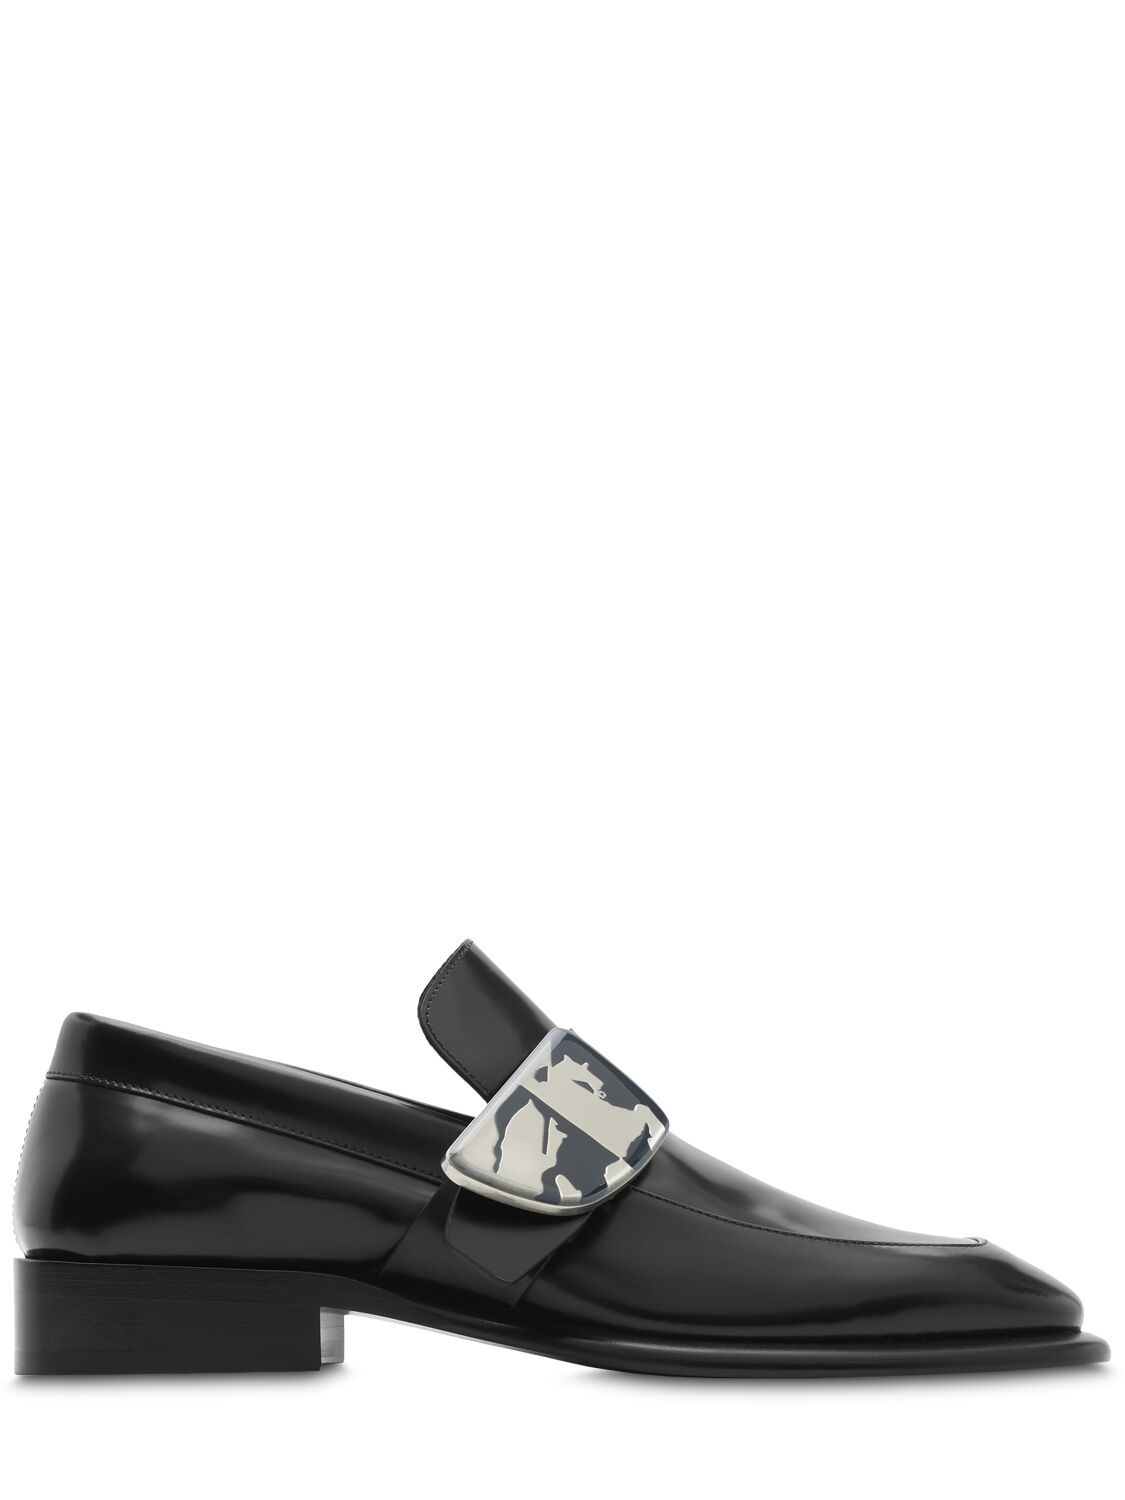 Burberry 10mm Schield Leather Loafers In Black